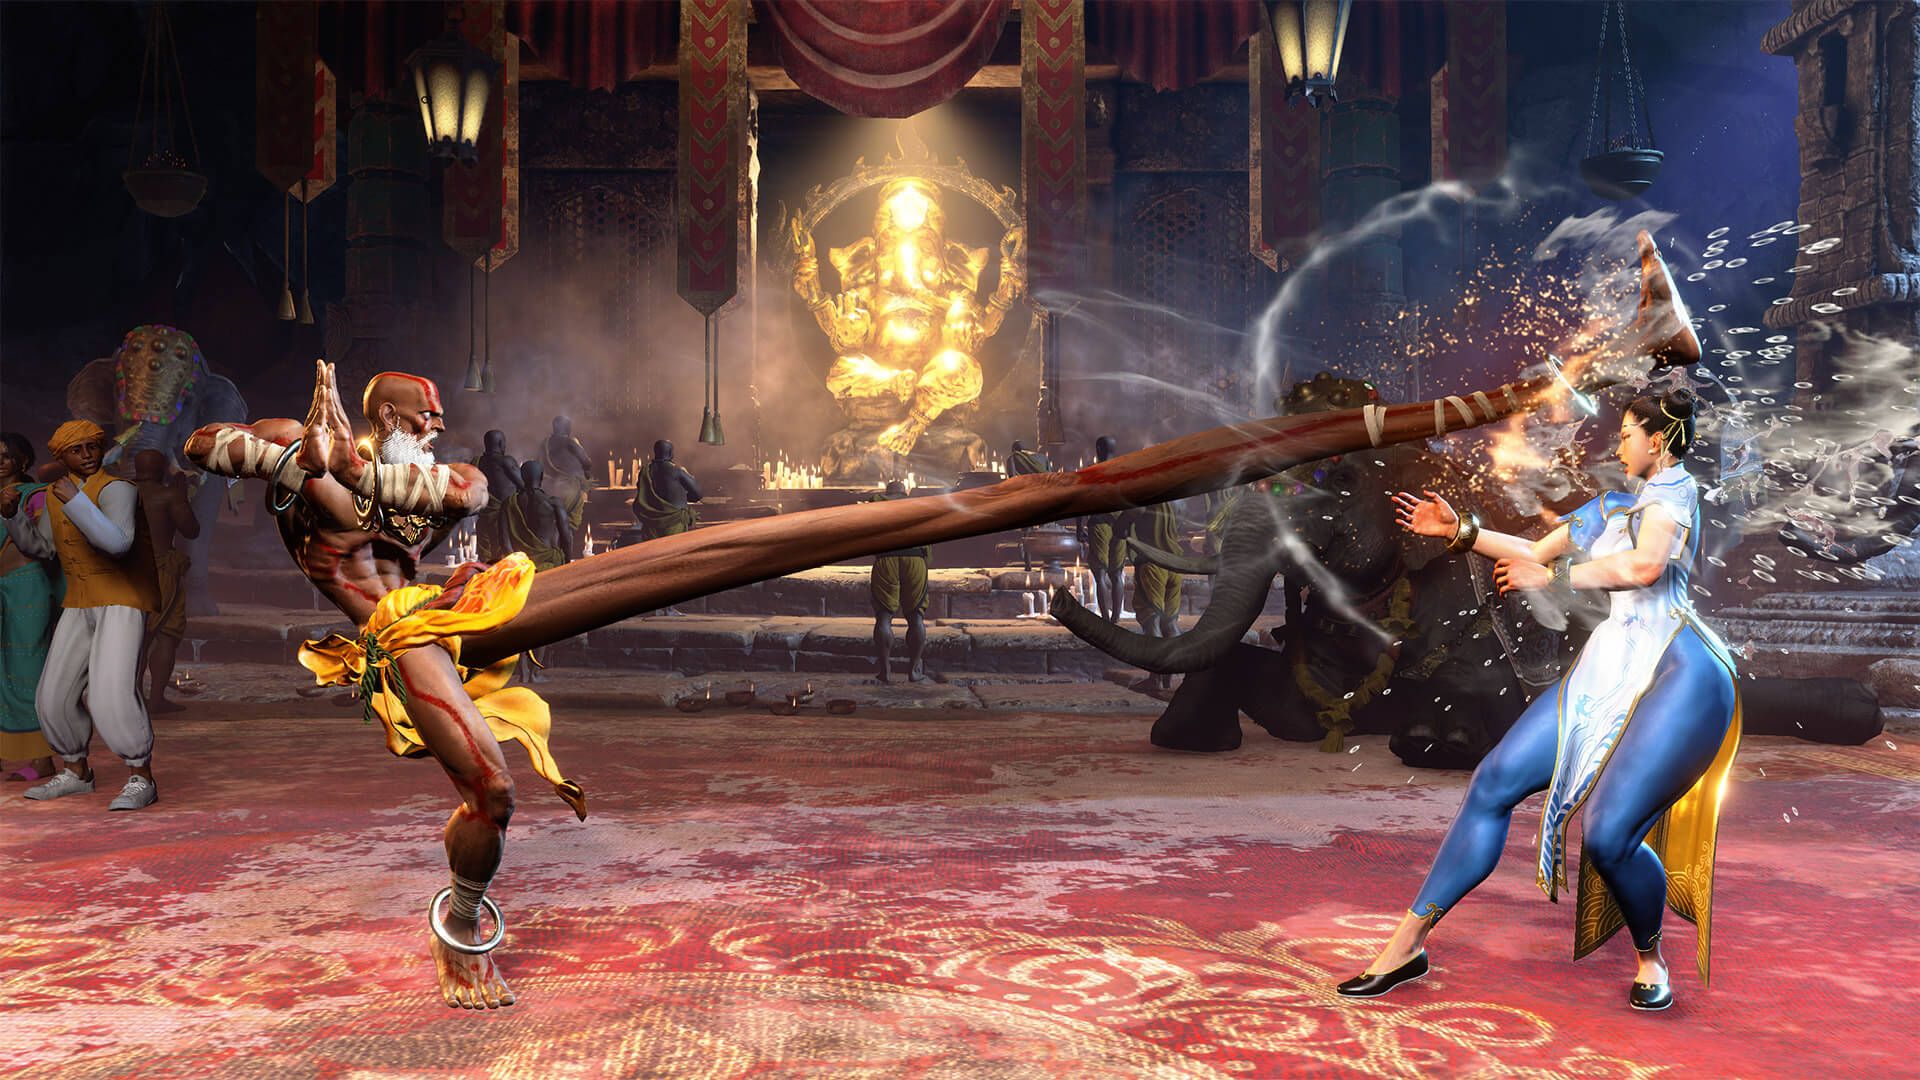 Bit of a stretching by Dhalsim